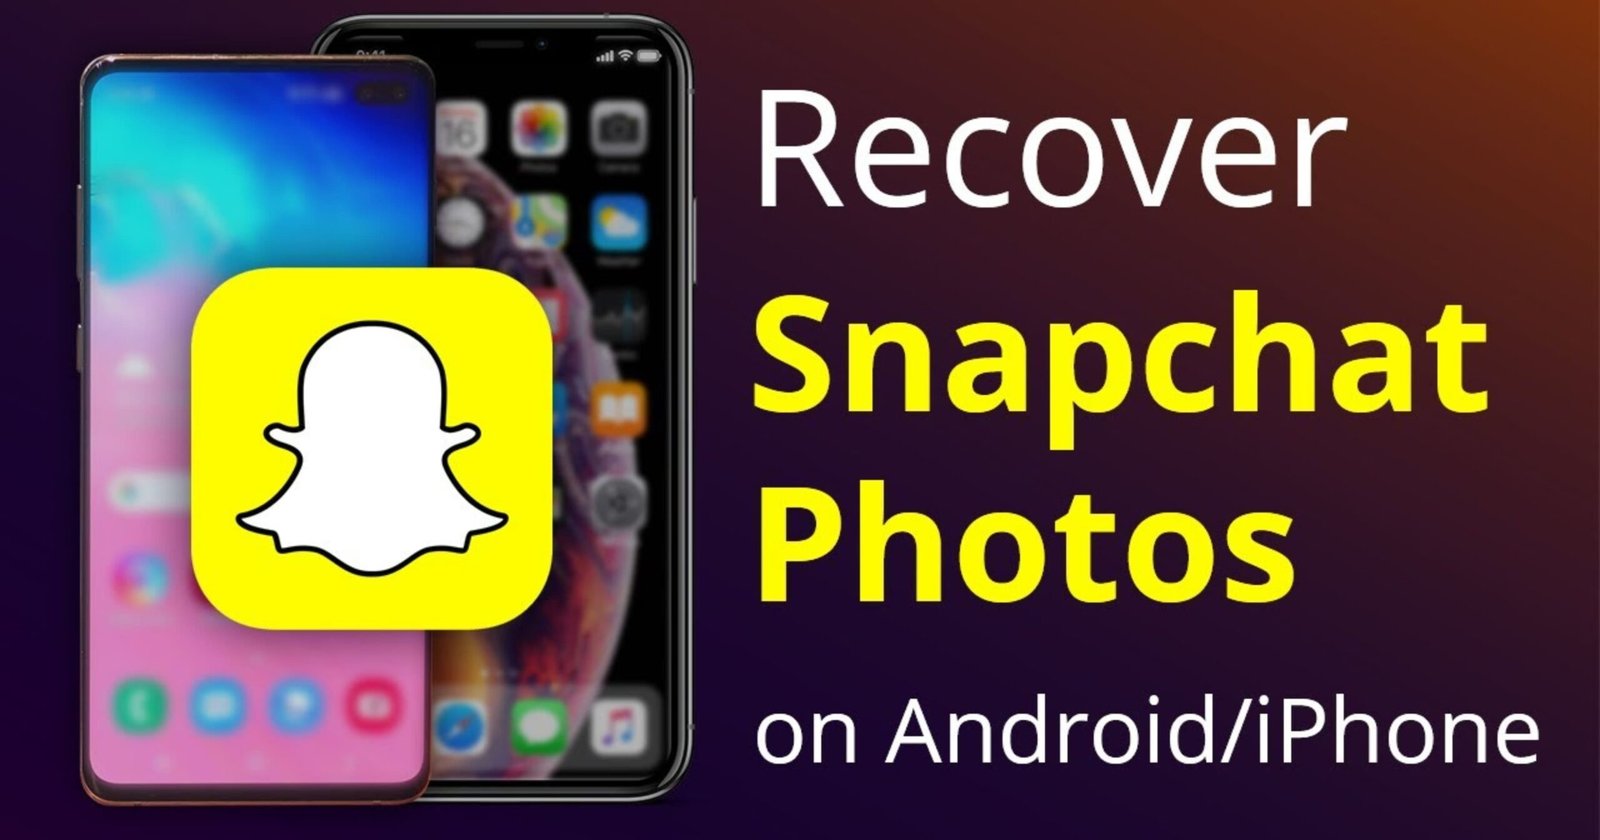 How to Recover Snapchat Pictures on iPhone Without a Computer